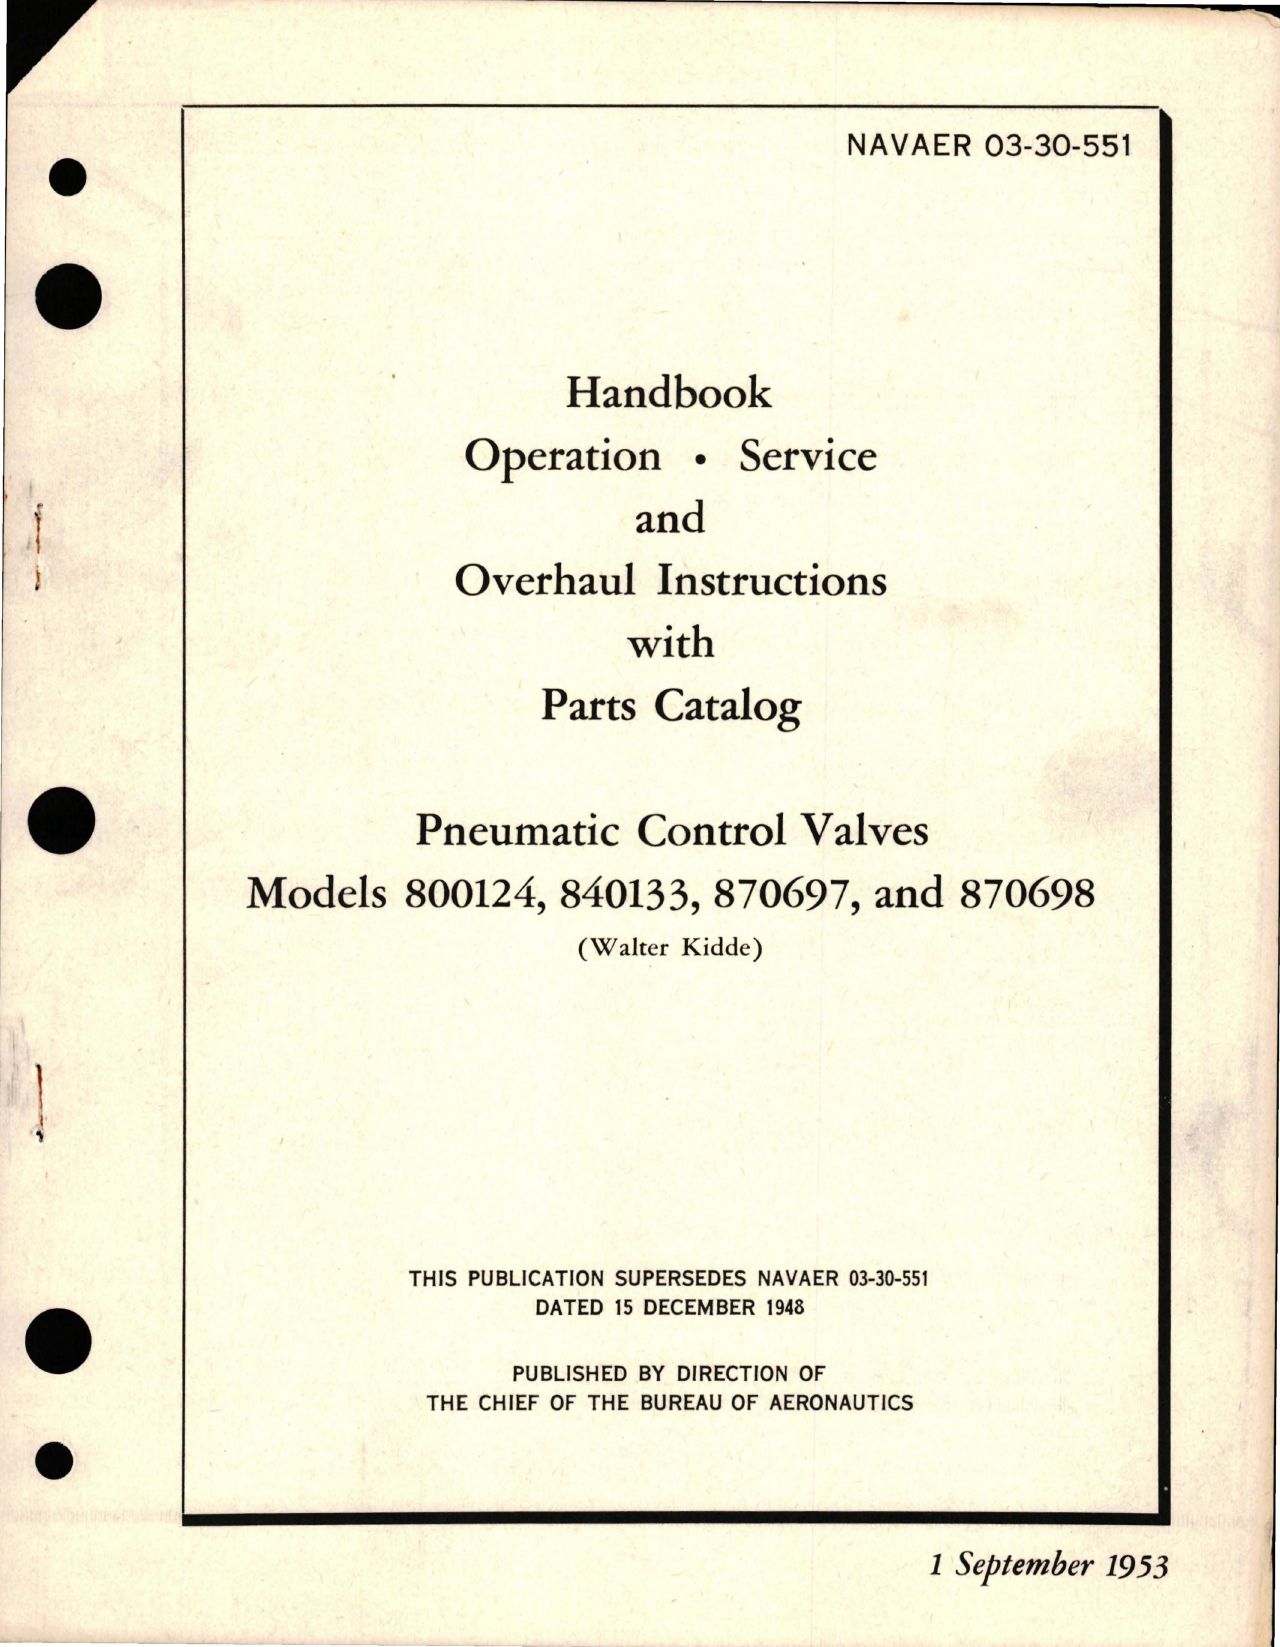 Sample page 1 from AirCorps Library document: Operation, Service and Overhaul Instructions with Parts Catalog for Pneumatic Control Valves